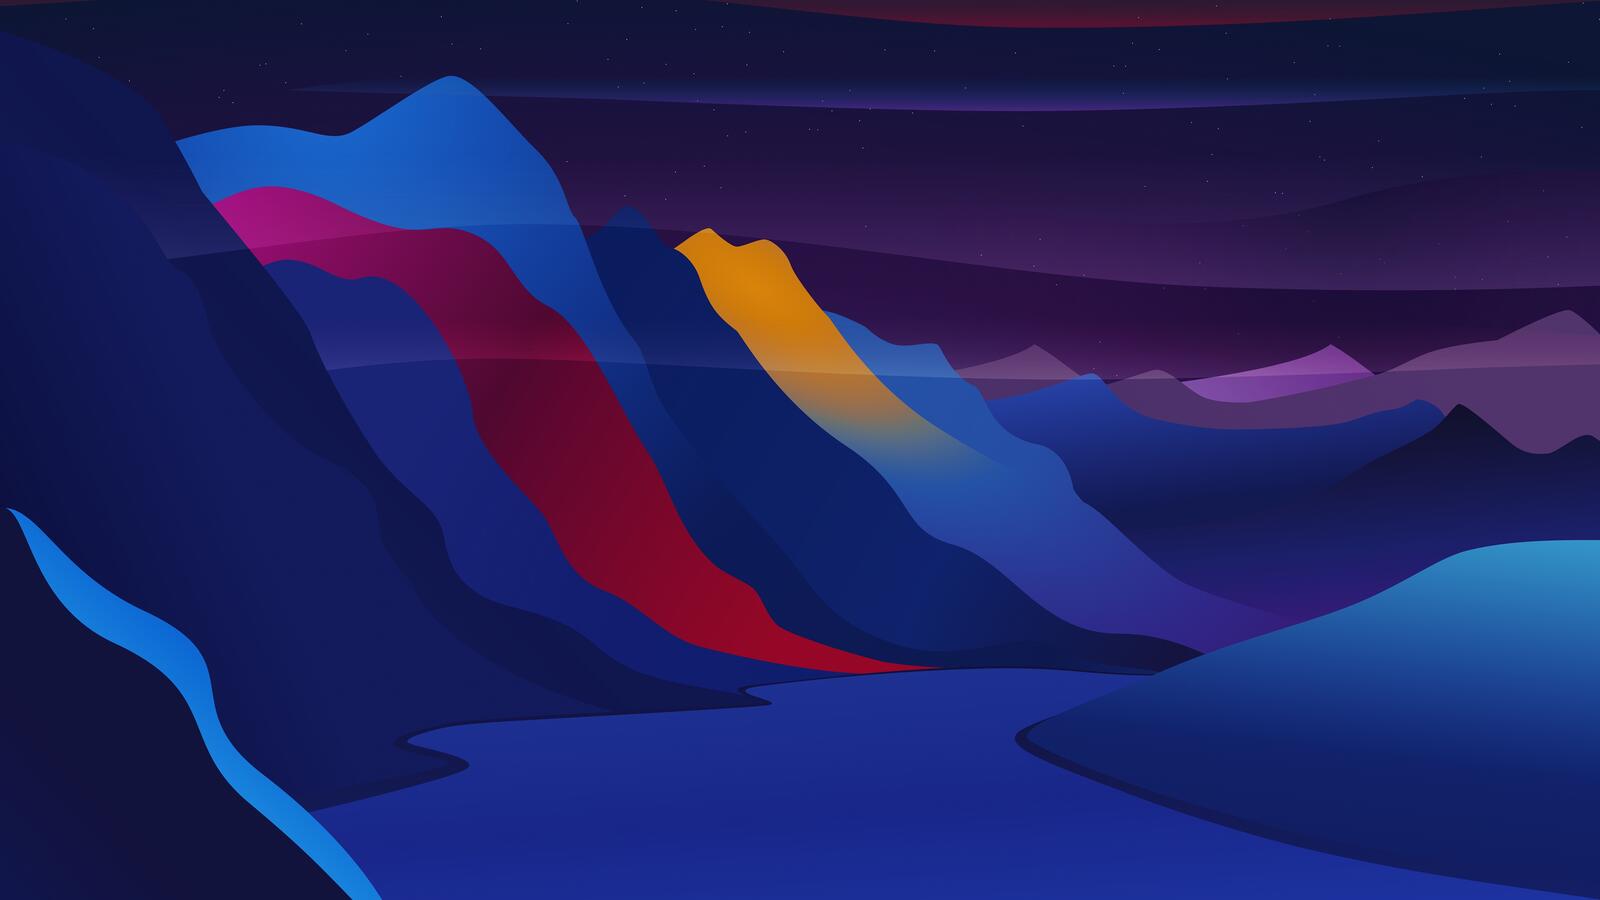 Free photo A drawing of colorful mountains with a river